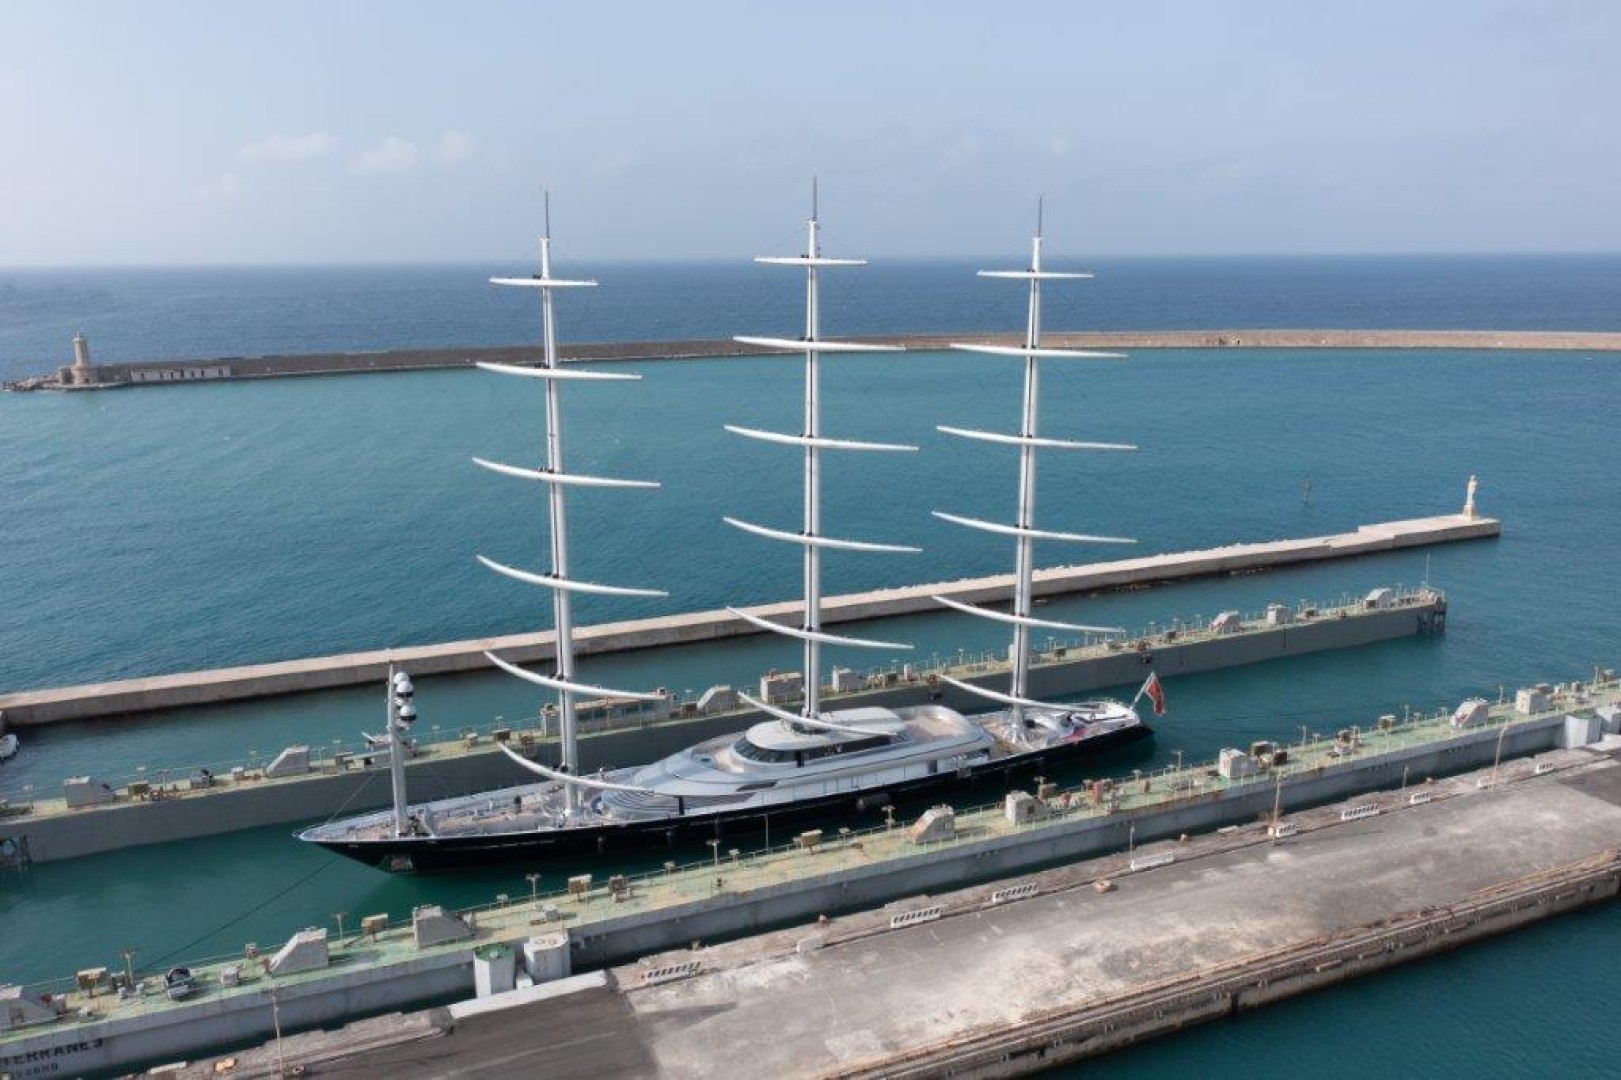 Maltese Falcon was entrusted to Lusben for a major and innovative refit